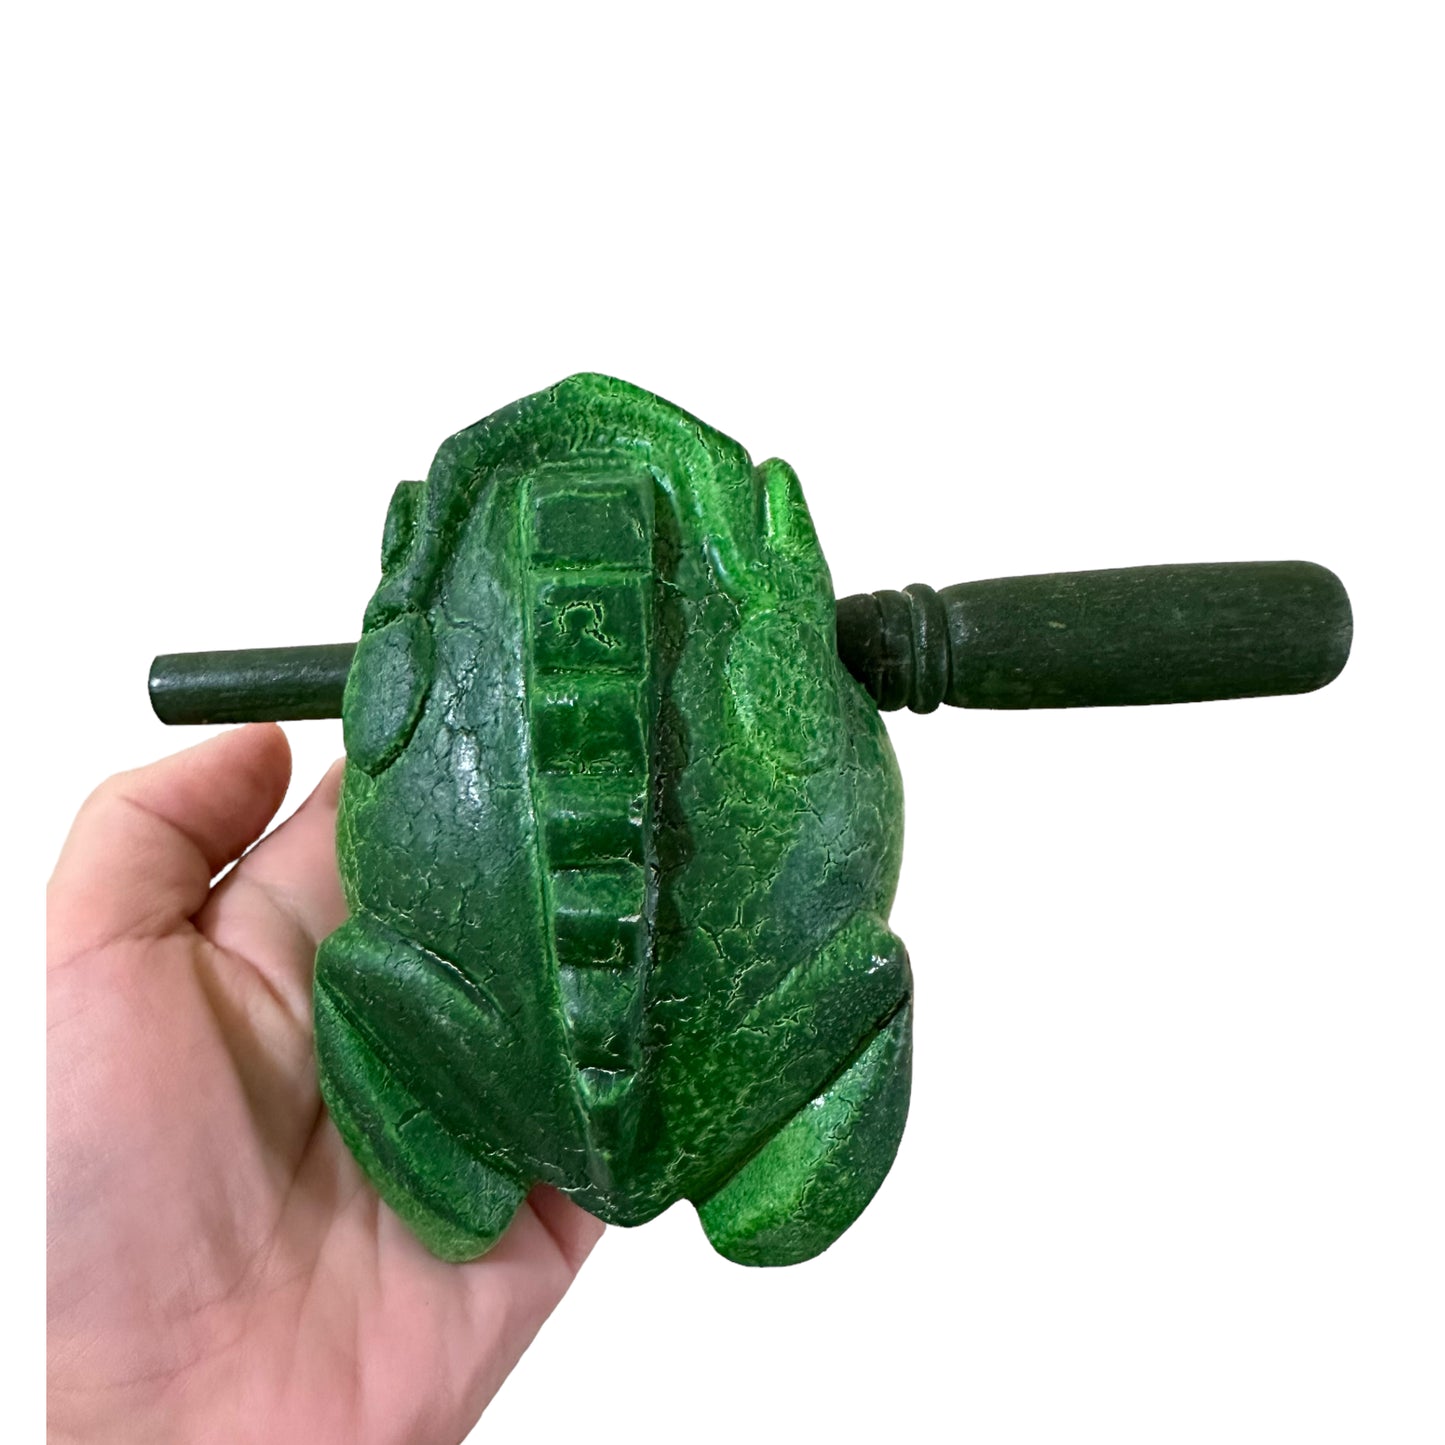 4" Large Green Tree Frog Musical Frog Percussion Instrument